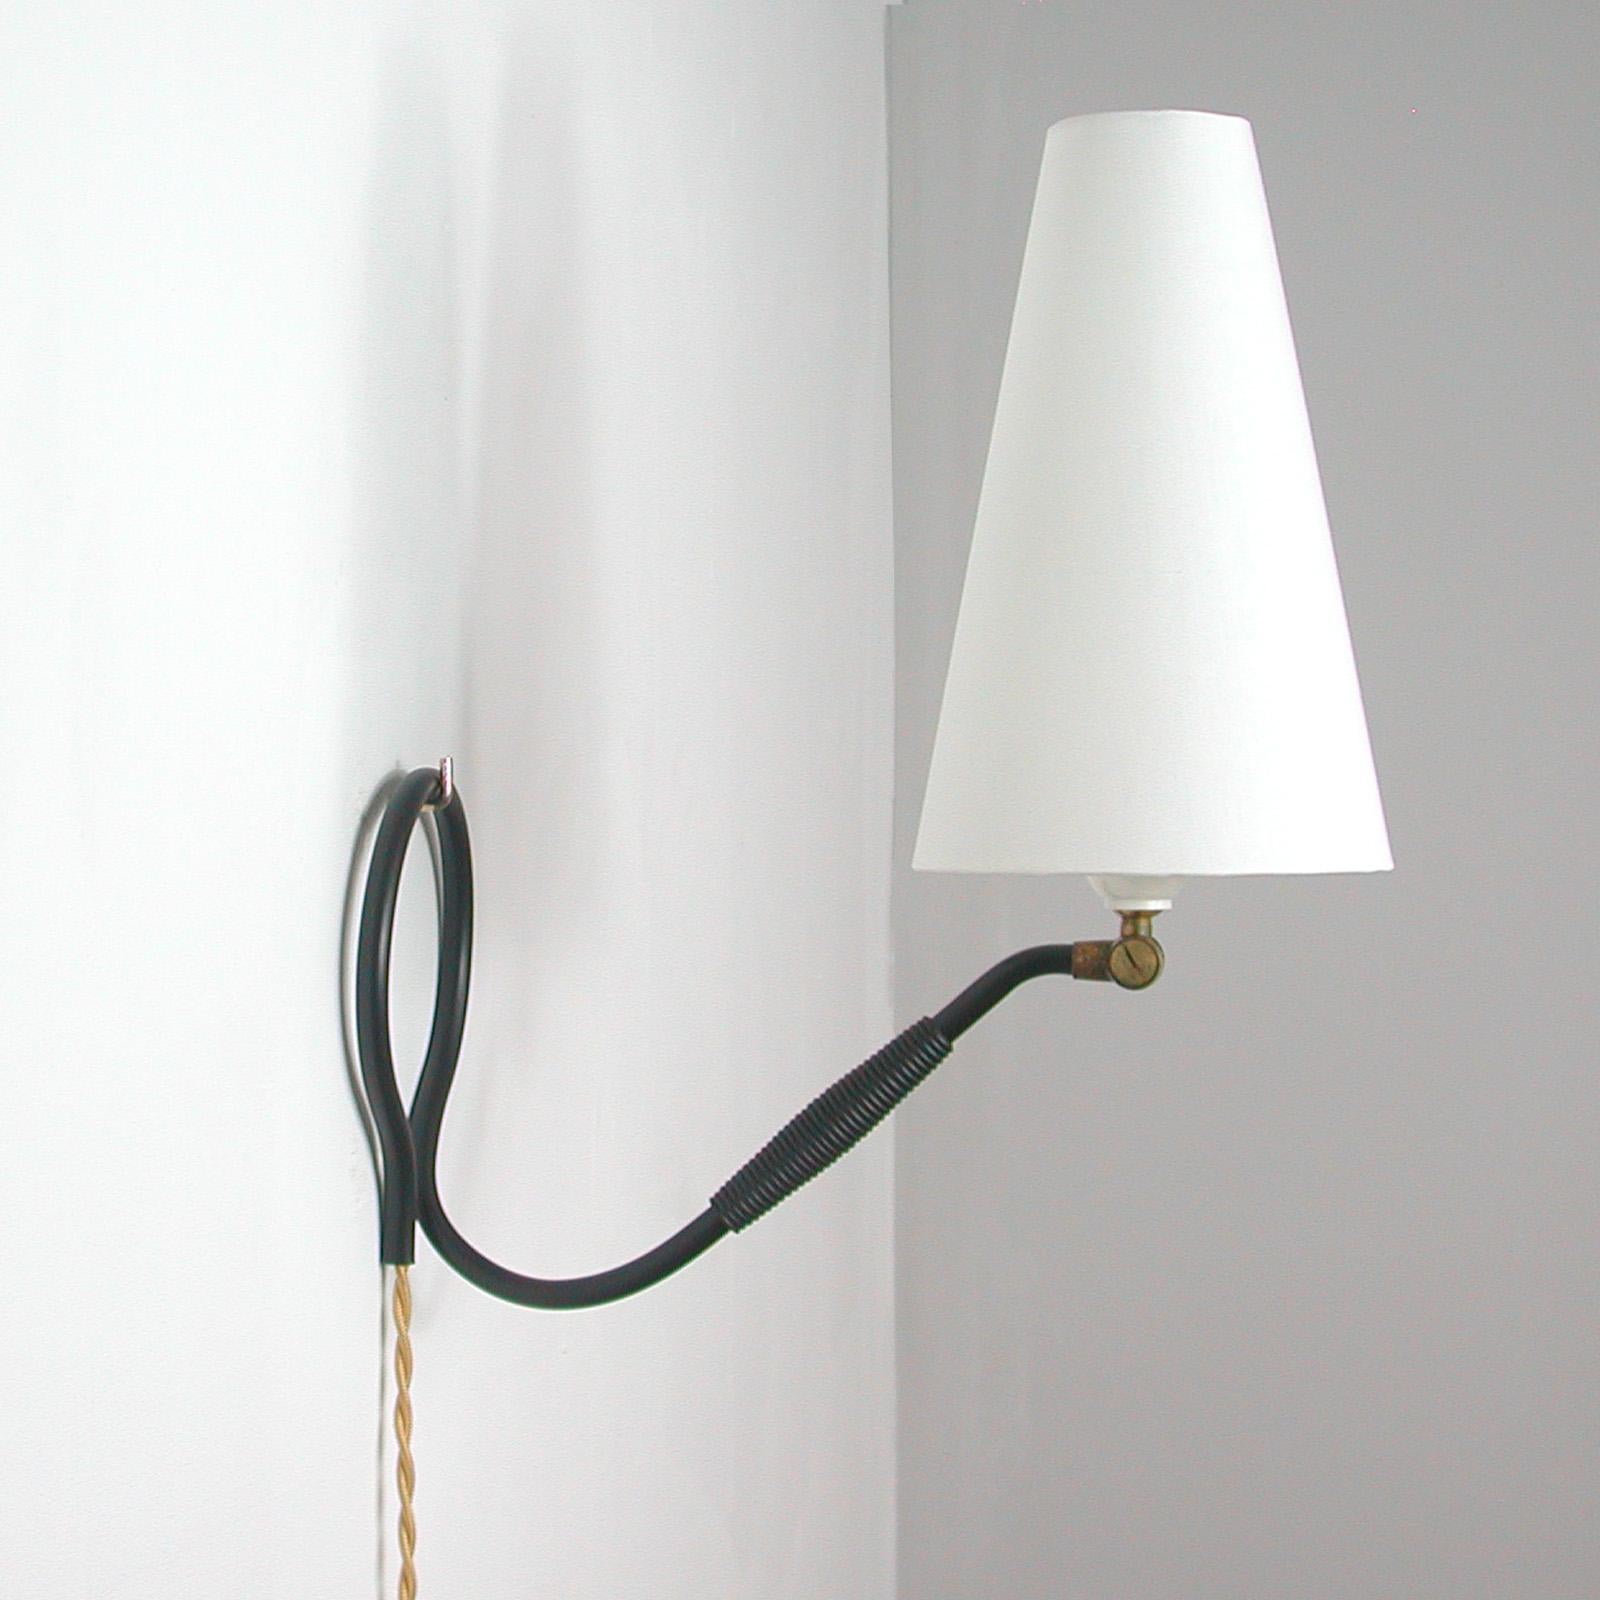 Adjustable Black Brass and Bakelite Wall or Table Lamp 306 by Kaare Klint, 1950s For Sale 1